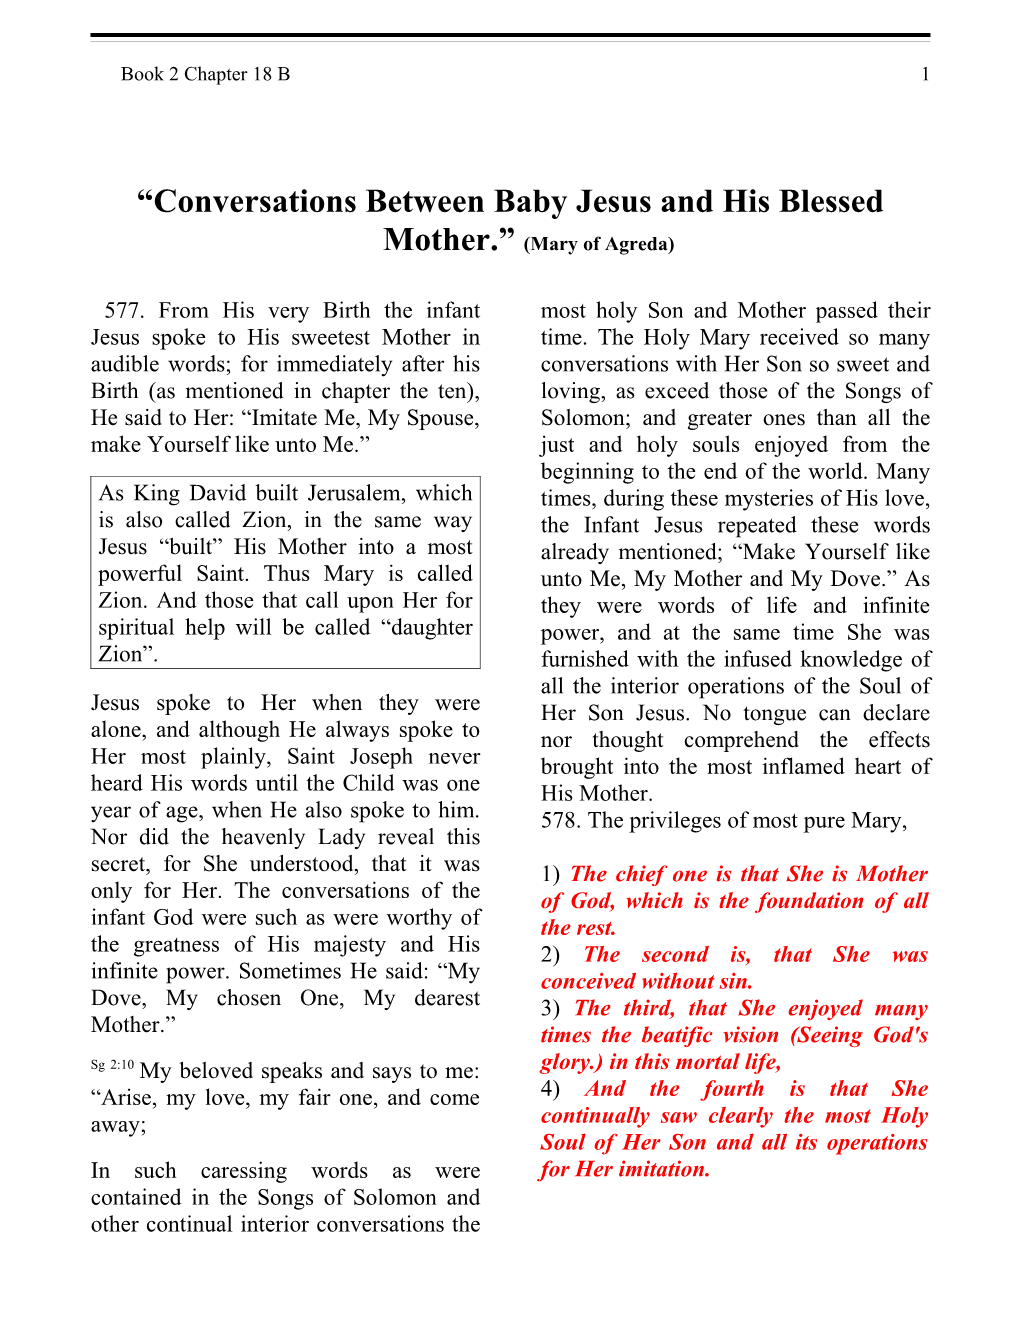 Conversations Between Baby Jesus and His Blessed Mother. (Mary of Agreda)